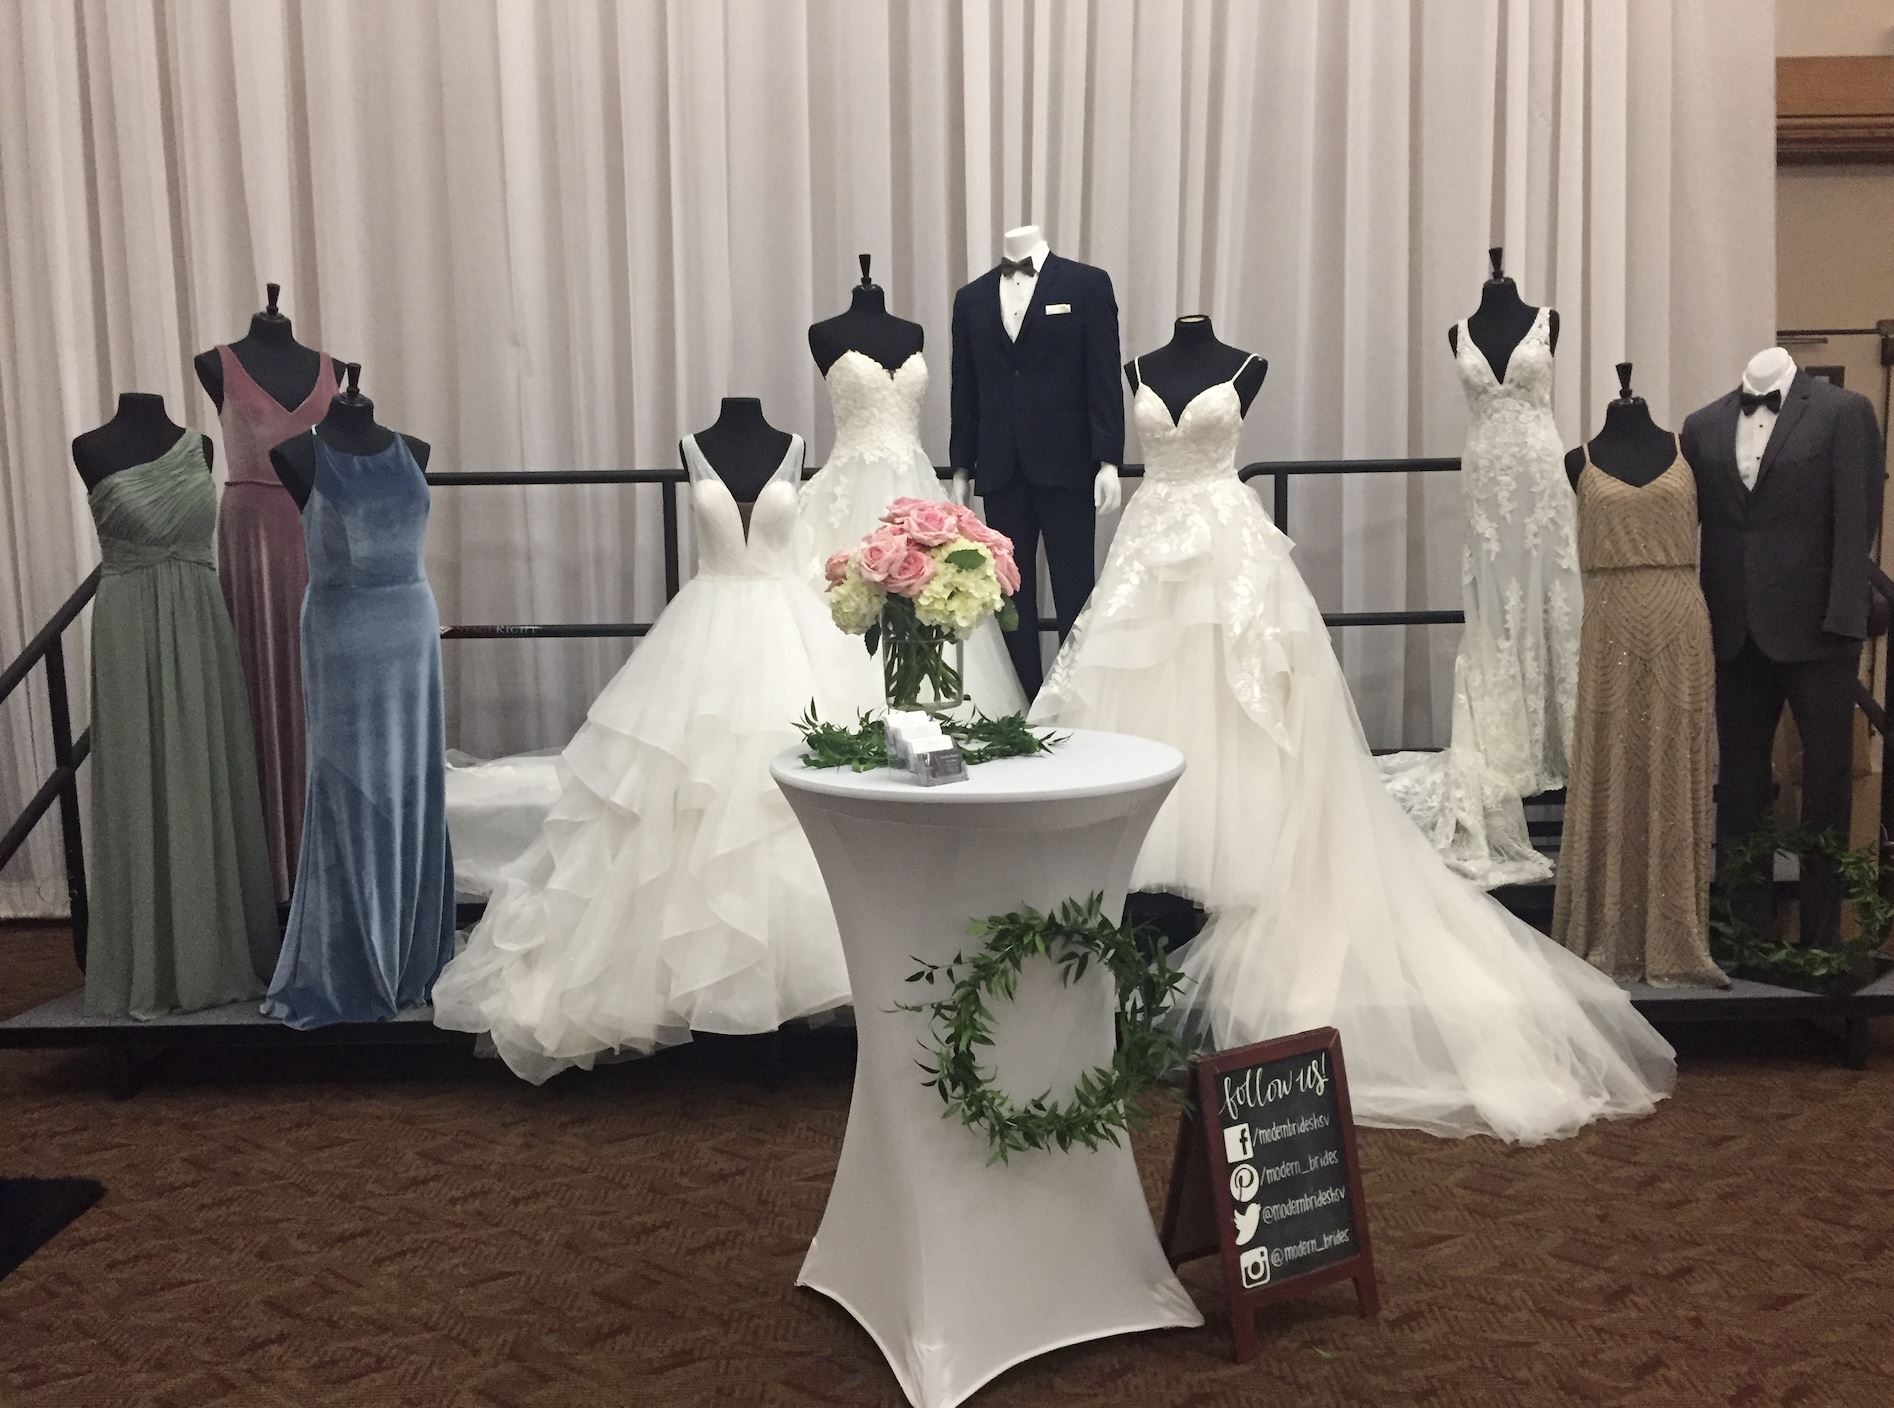 Photo of the bridal gowns and tuxedos